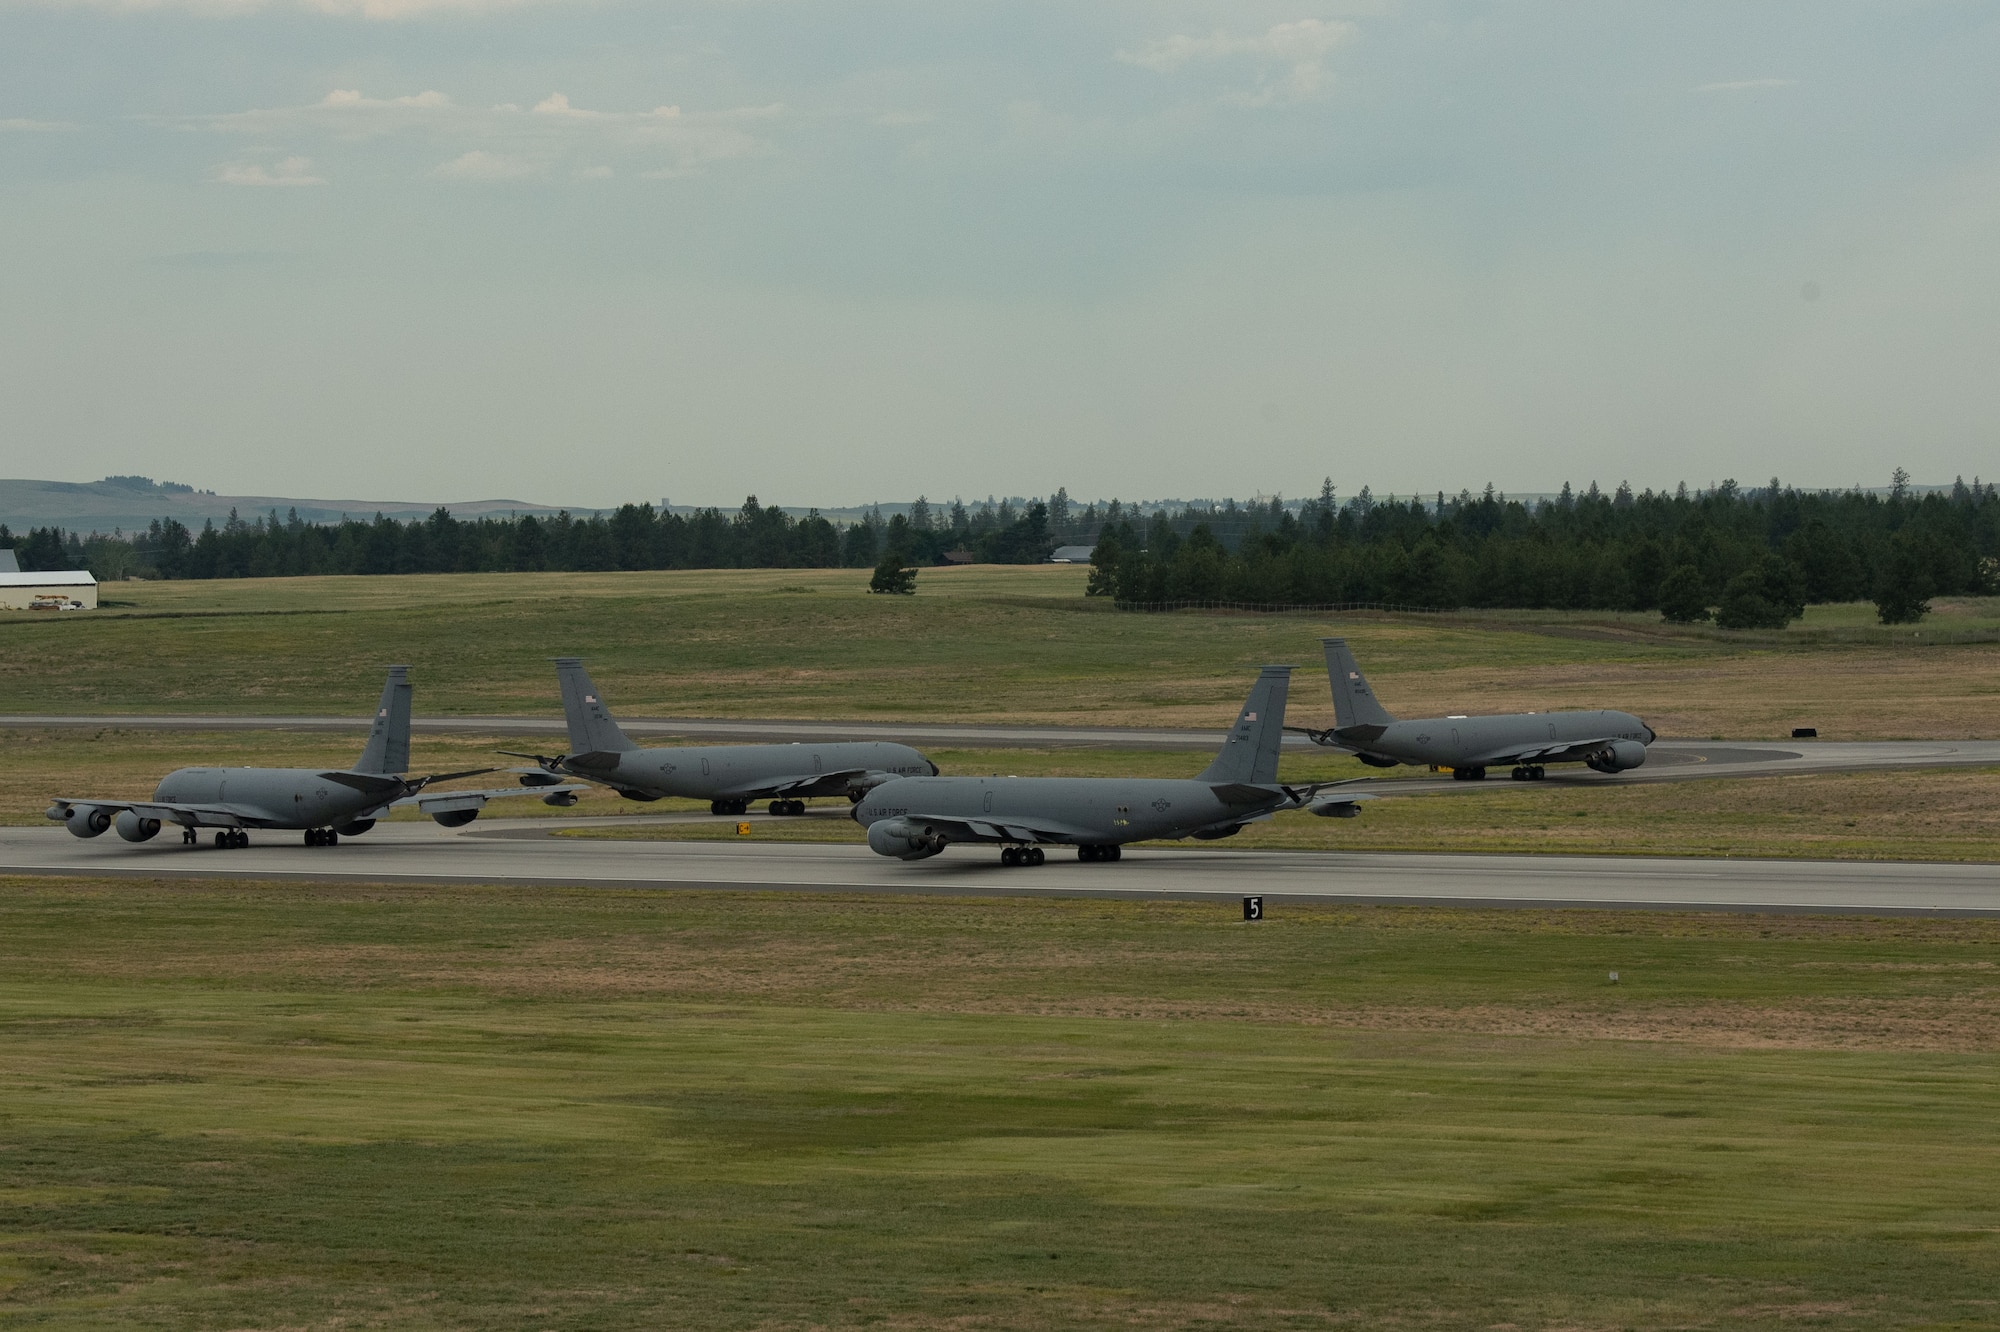 Four KC-135 Stratotankers taxi into position before minimum-interval takeoffs as part of Operation Centennial Contact at Fairchild Air Force Base, Washington, June 27, 2023. The movement, which included stops at Yellowstone National Park, Mount Rushmore and Glacier National Park, was part of Air Mobility Command’s celebration of 100 years air refueling operations and demonstrated the 92nd Air Refueling Wing’s global reach capabilities. Since its inception in 1923, Air refueling has become a crucial component of military and civilian aviation operations around the world by extending the range and endurance of aircraft and enabling them to complete missions that would otherwise be impossible or require multiple stops. As a result, this capability is essential for strategic and tactical operations, as well as humanitarian relief efforts in support of AMC, U.S. Transportation Command and Department of Defense priorities. (U.S. Air Force photo by Airman 1st Class Clare Werner)